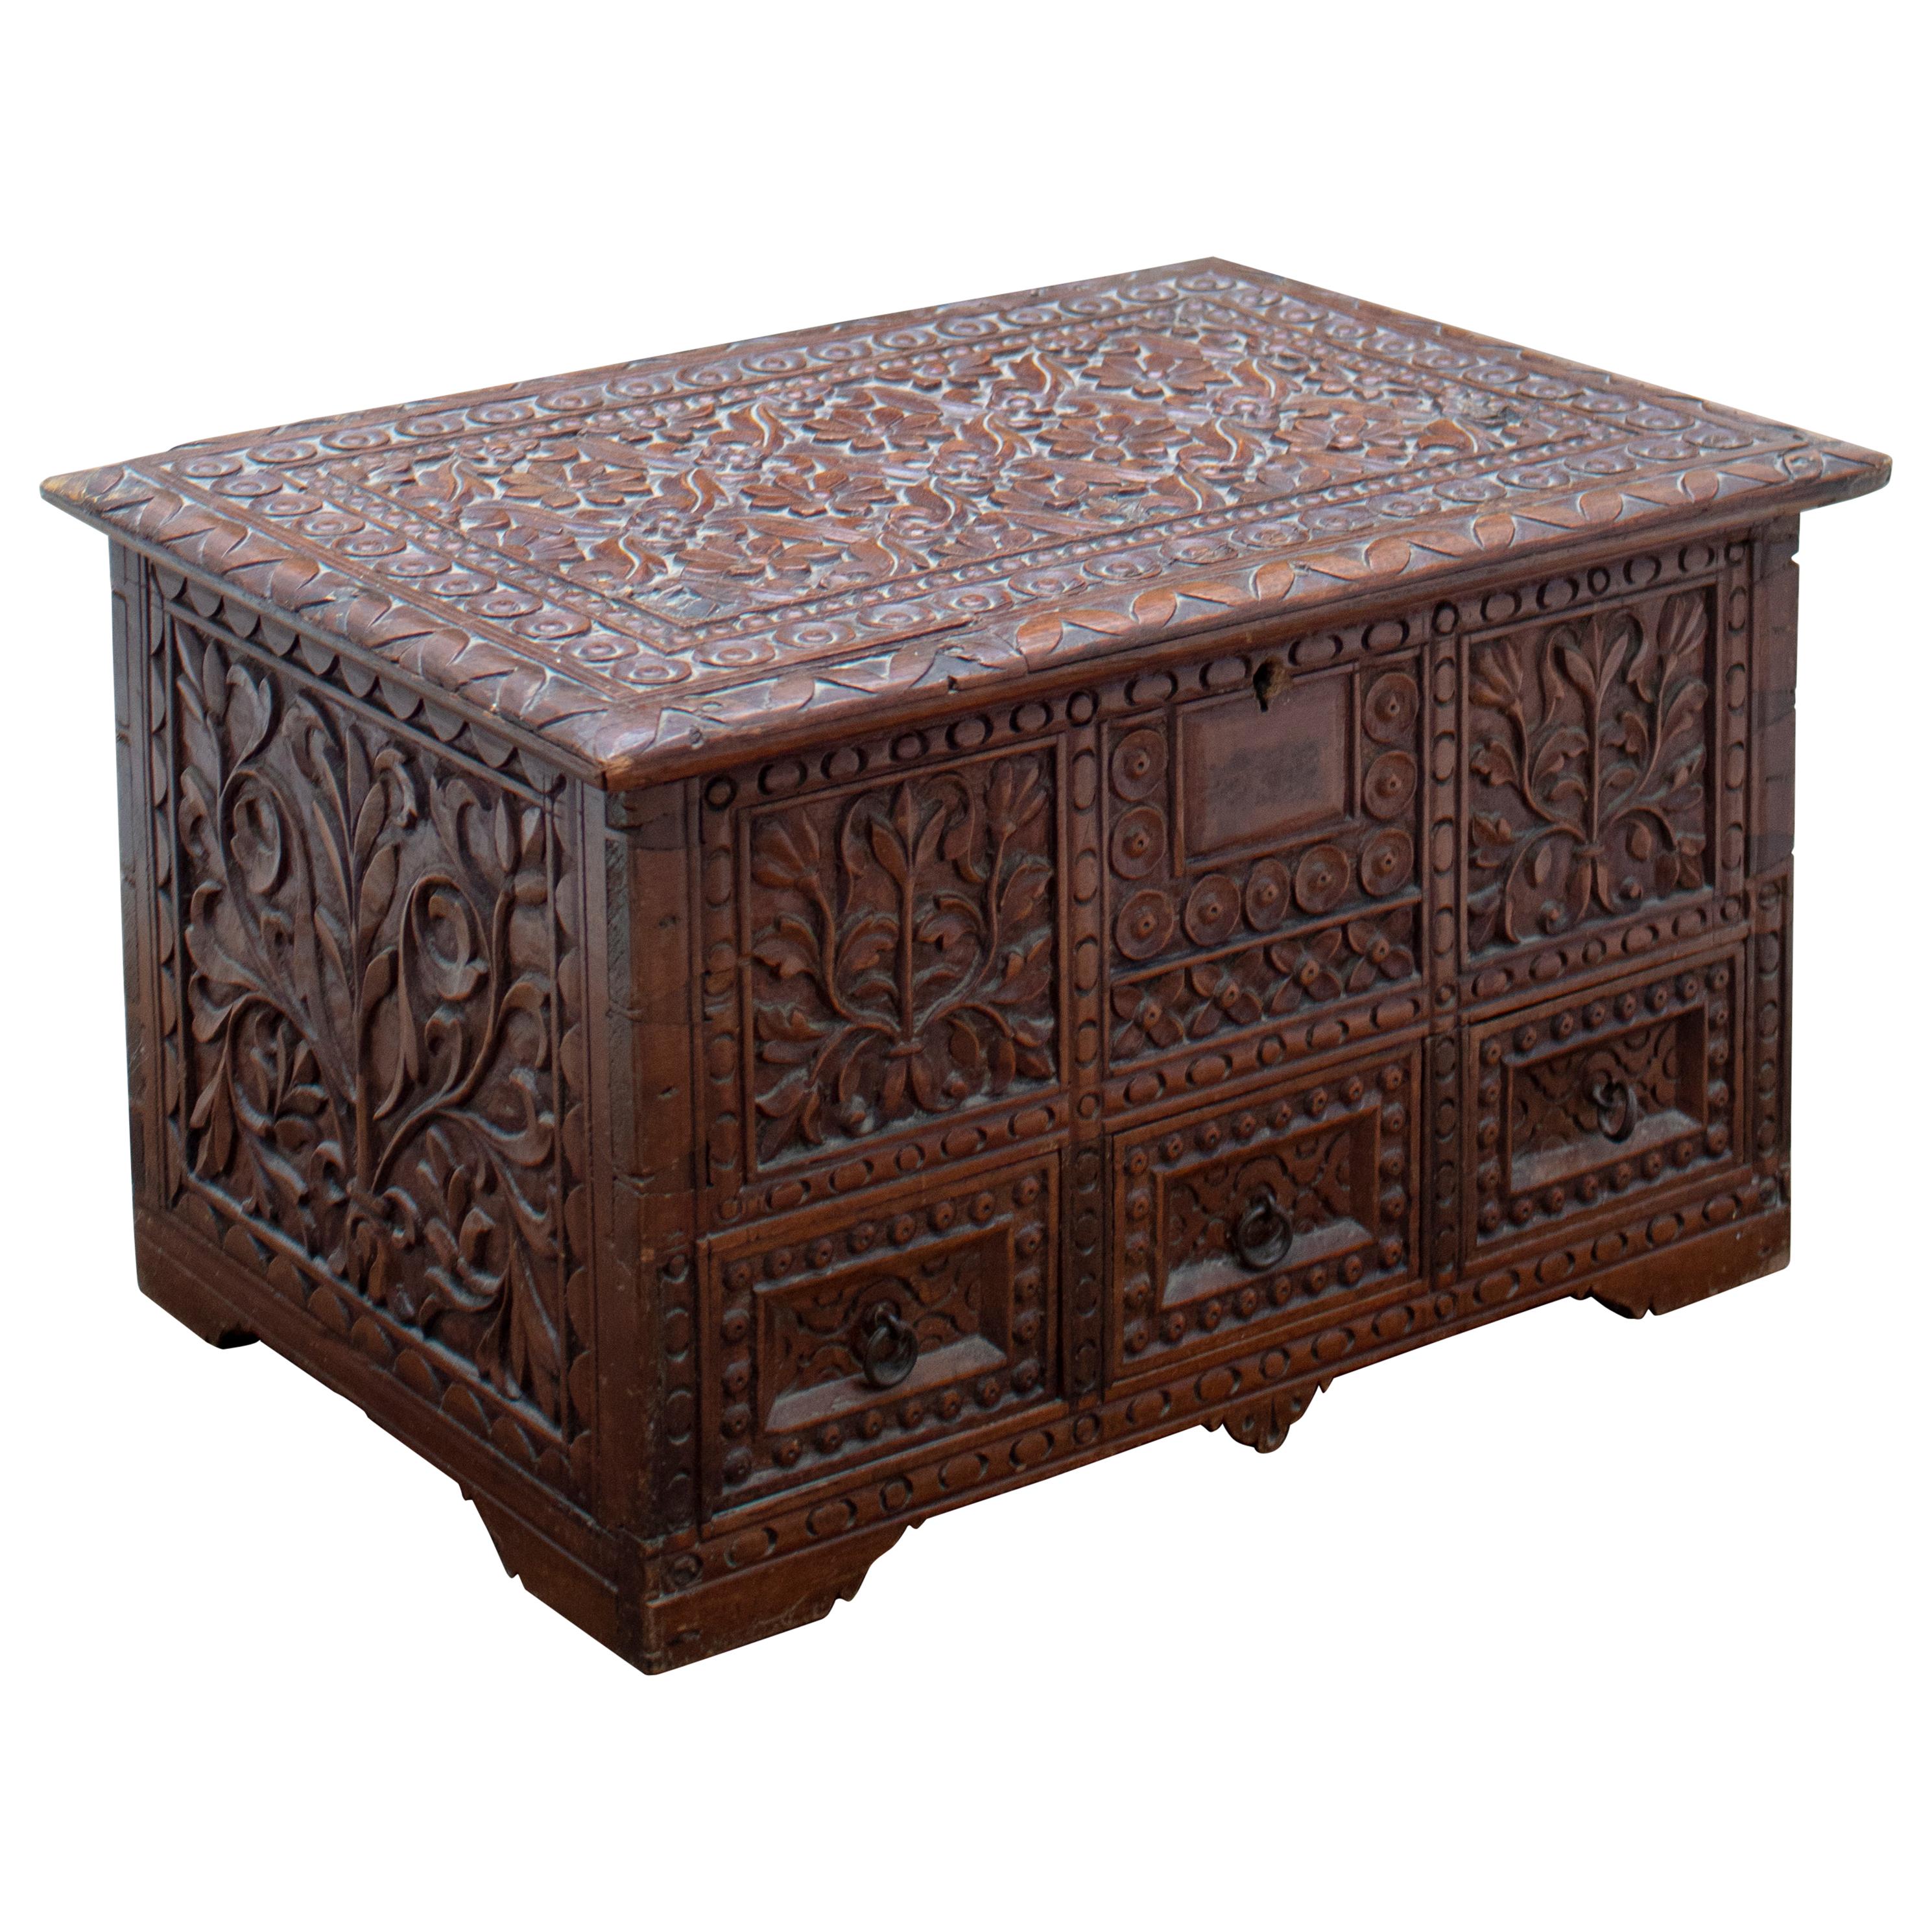 19th Century Anglo-Indian Hand Carved Tropical Wood Box